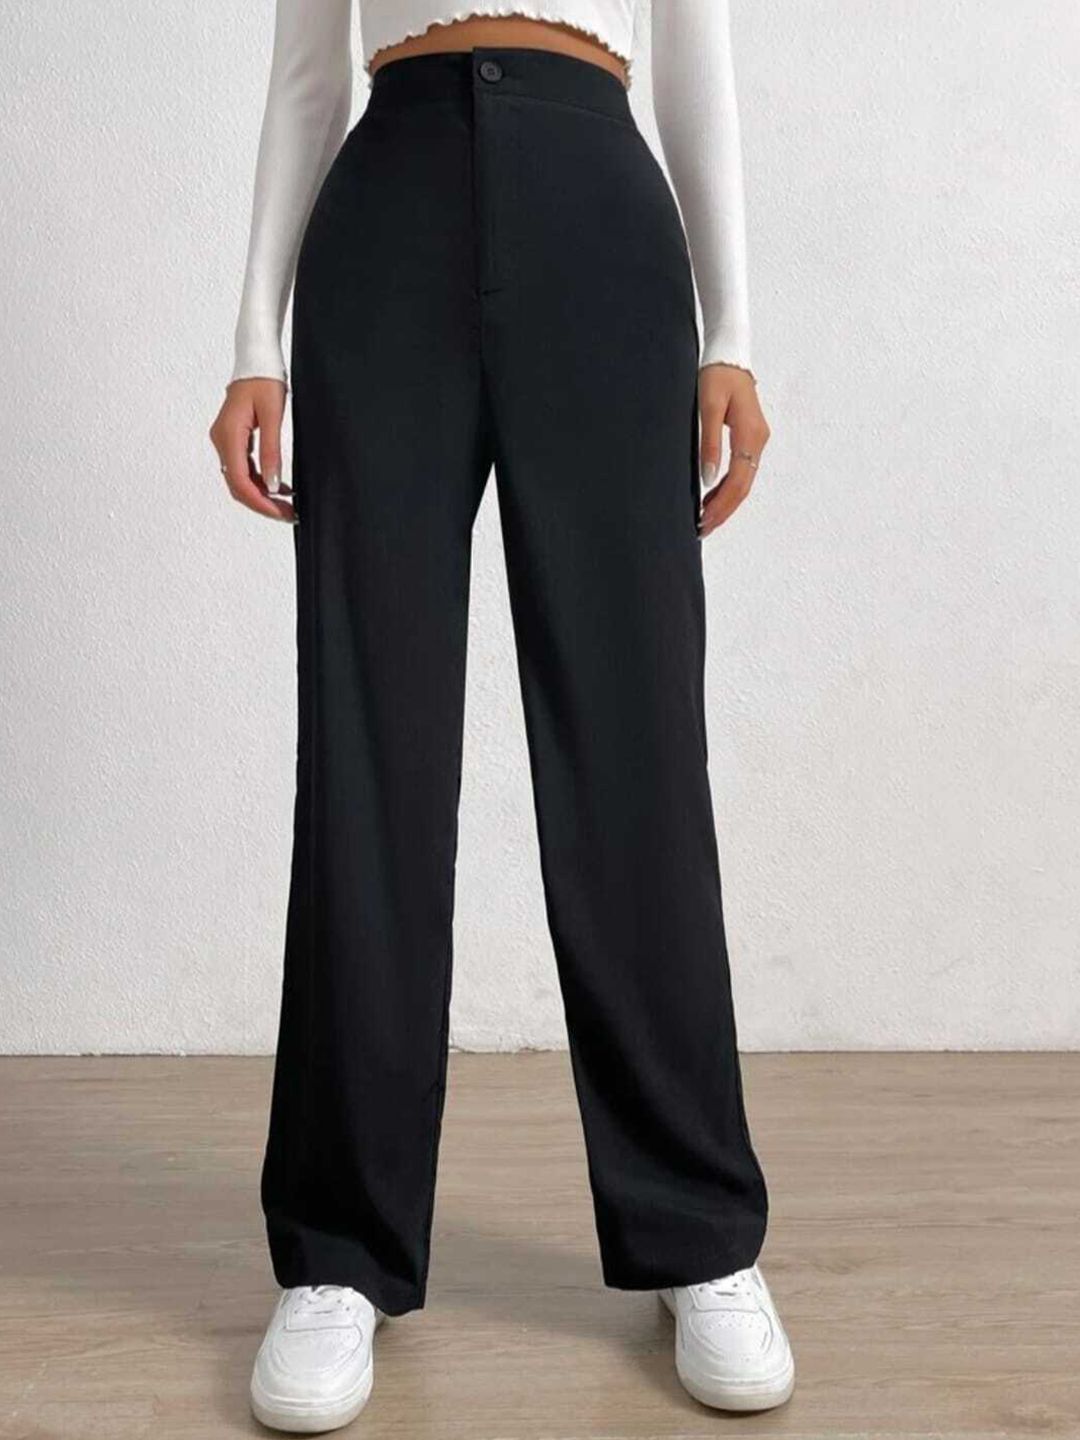 Next One Women Black Classic Loose Fit High-Rise Easy Wash Trousers Price in India